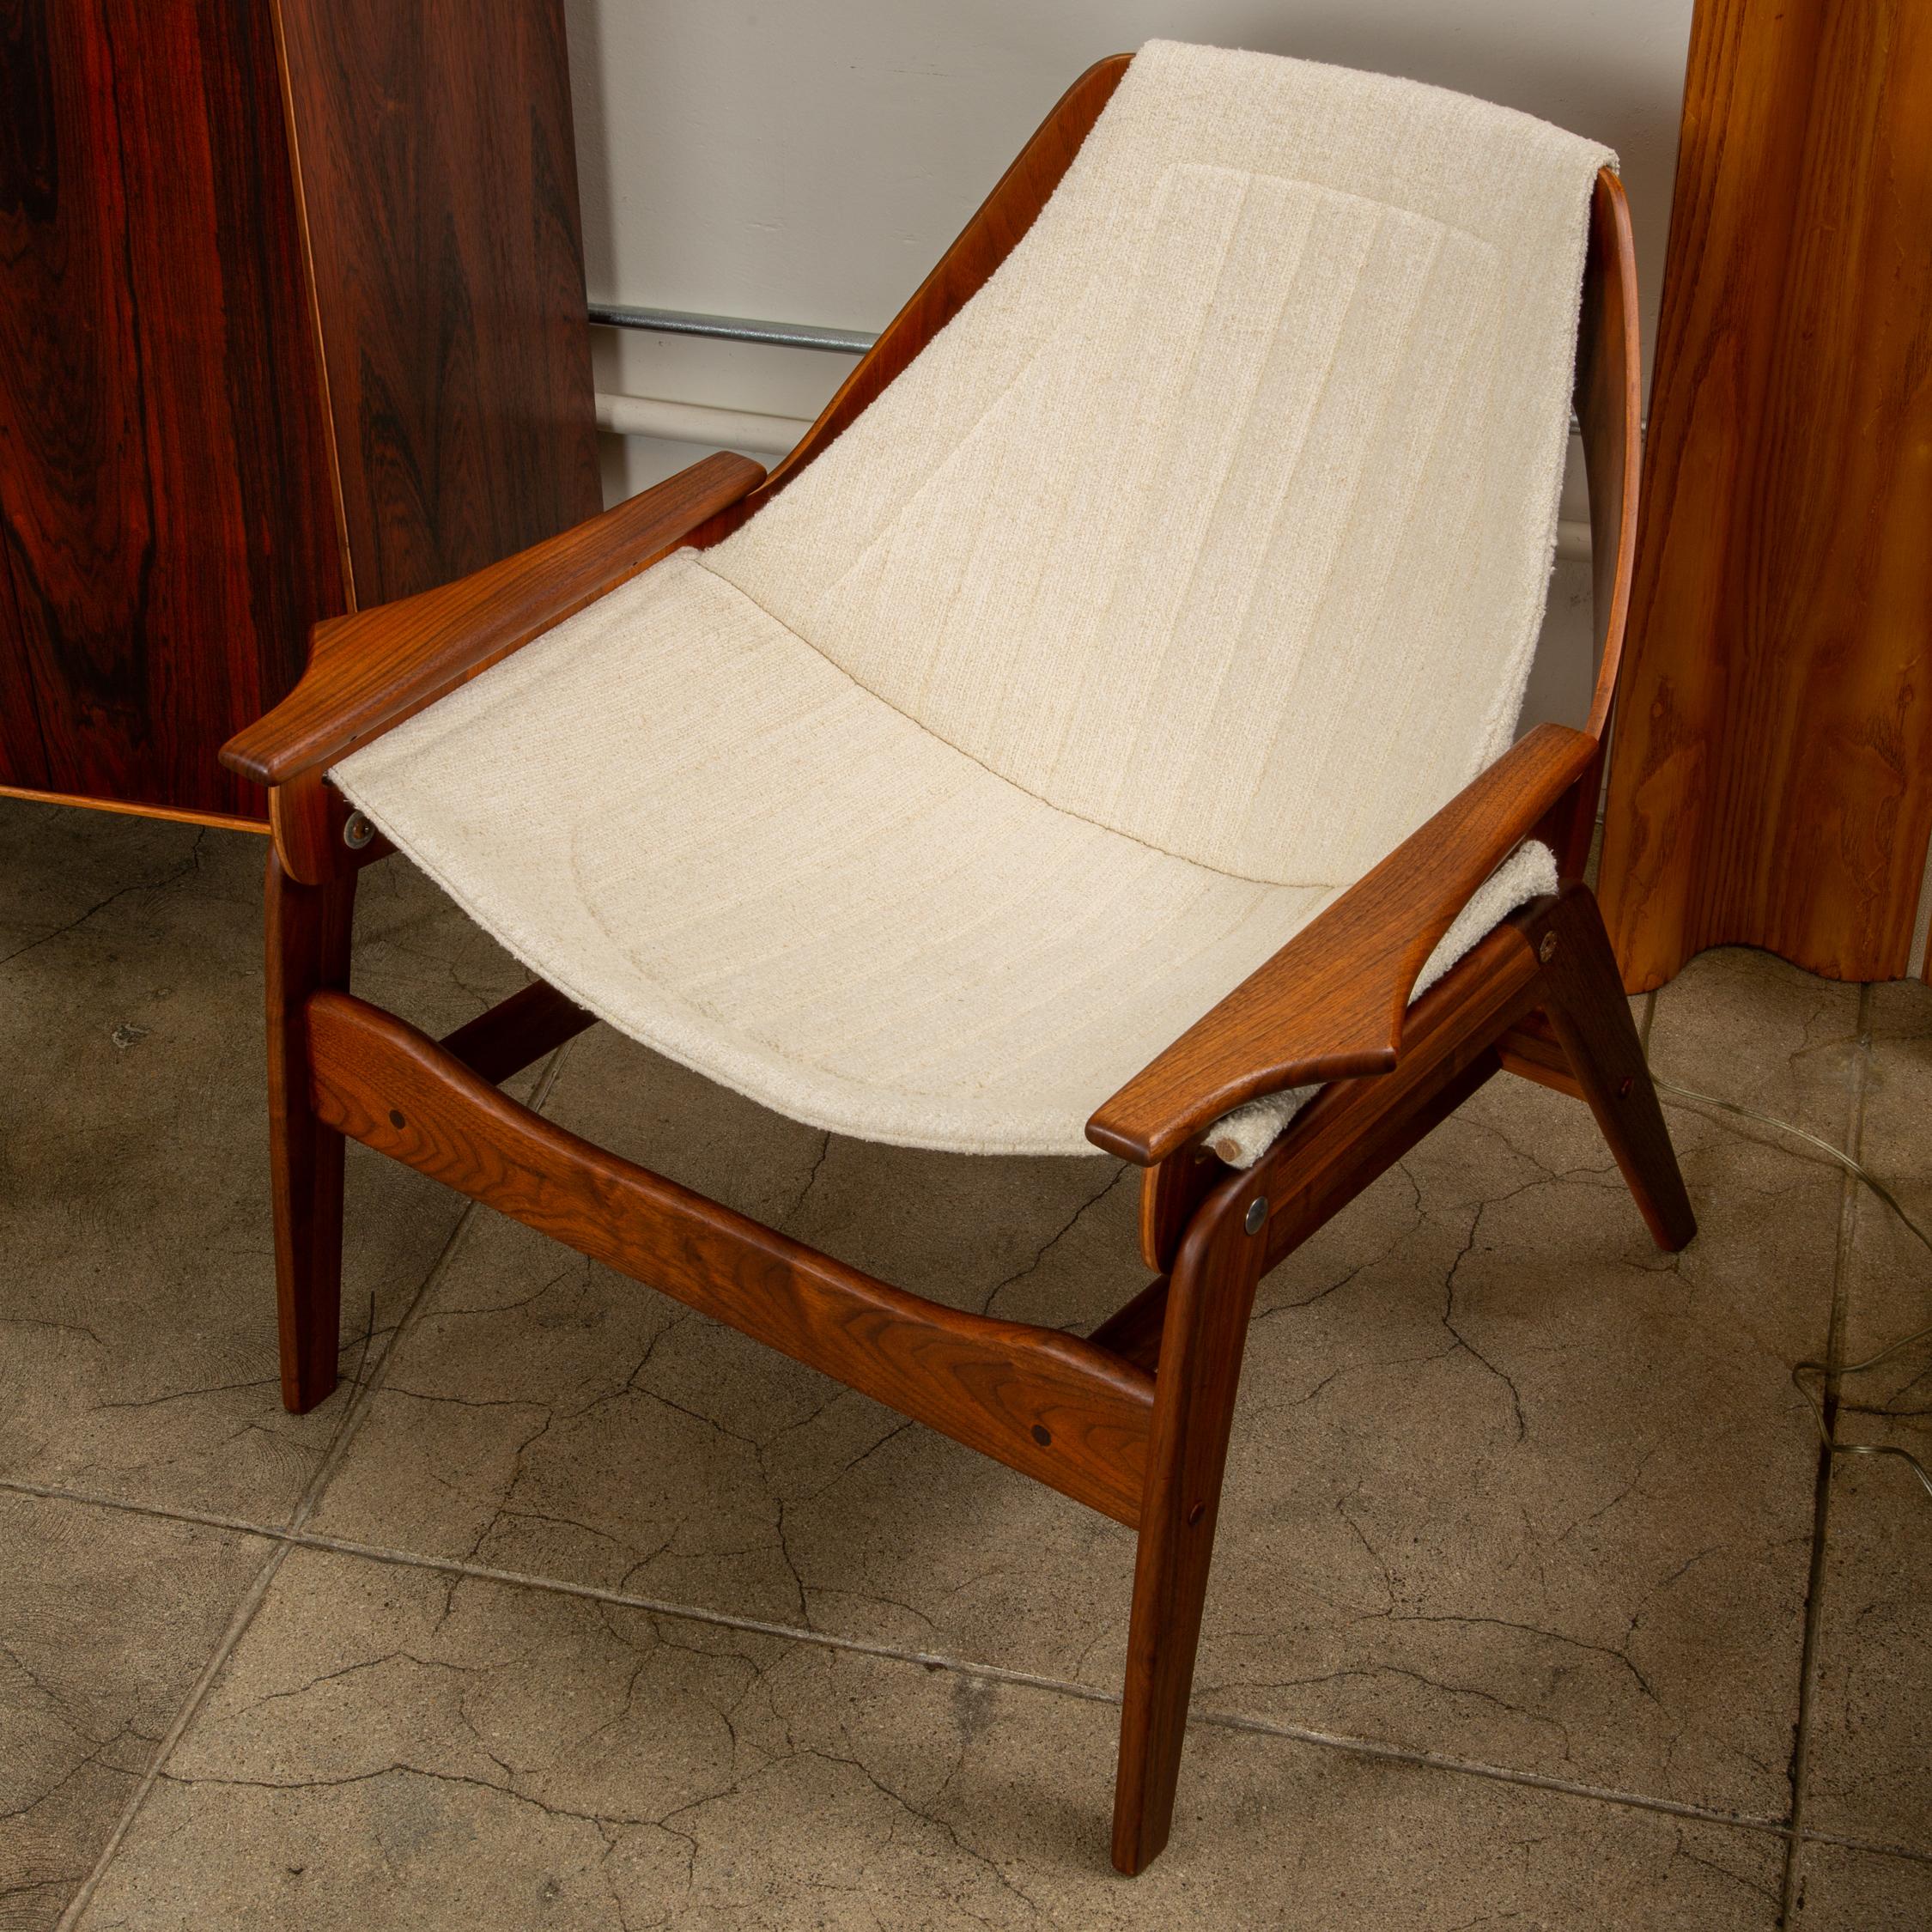 A pair of walnut sling lounge chairs by Jerry Johnson designed in 1968. The refinished walnut frames support a newly upholstered off-white bouclé fabric sling. 

Condition: Excellent vintage condition, both chairs professionally refinished and